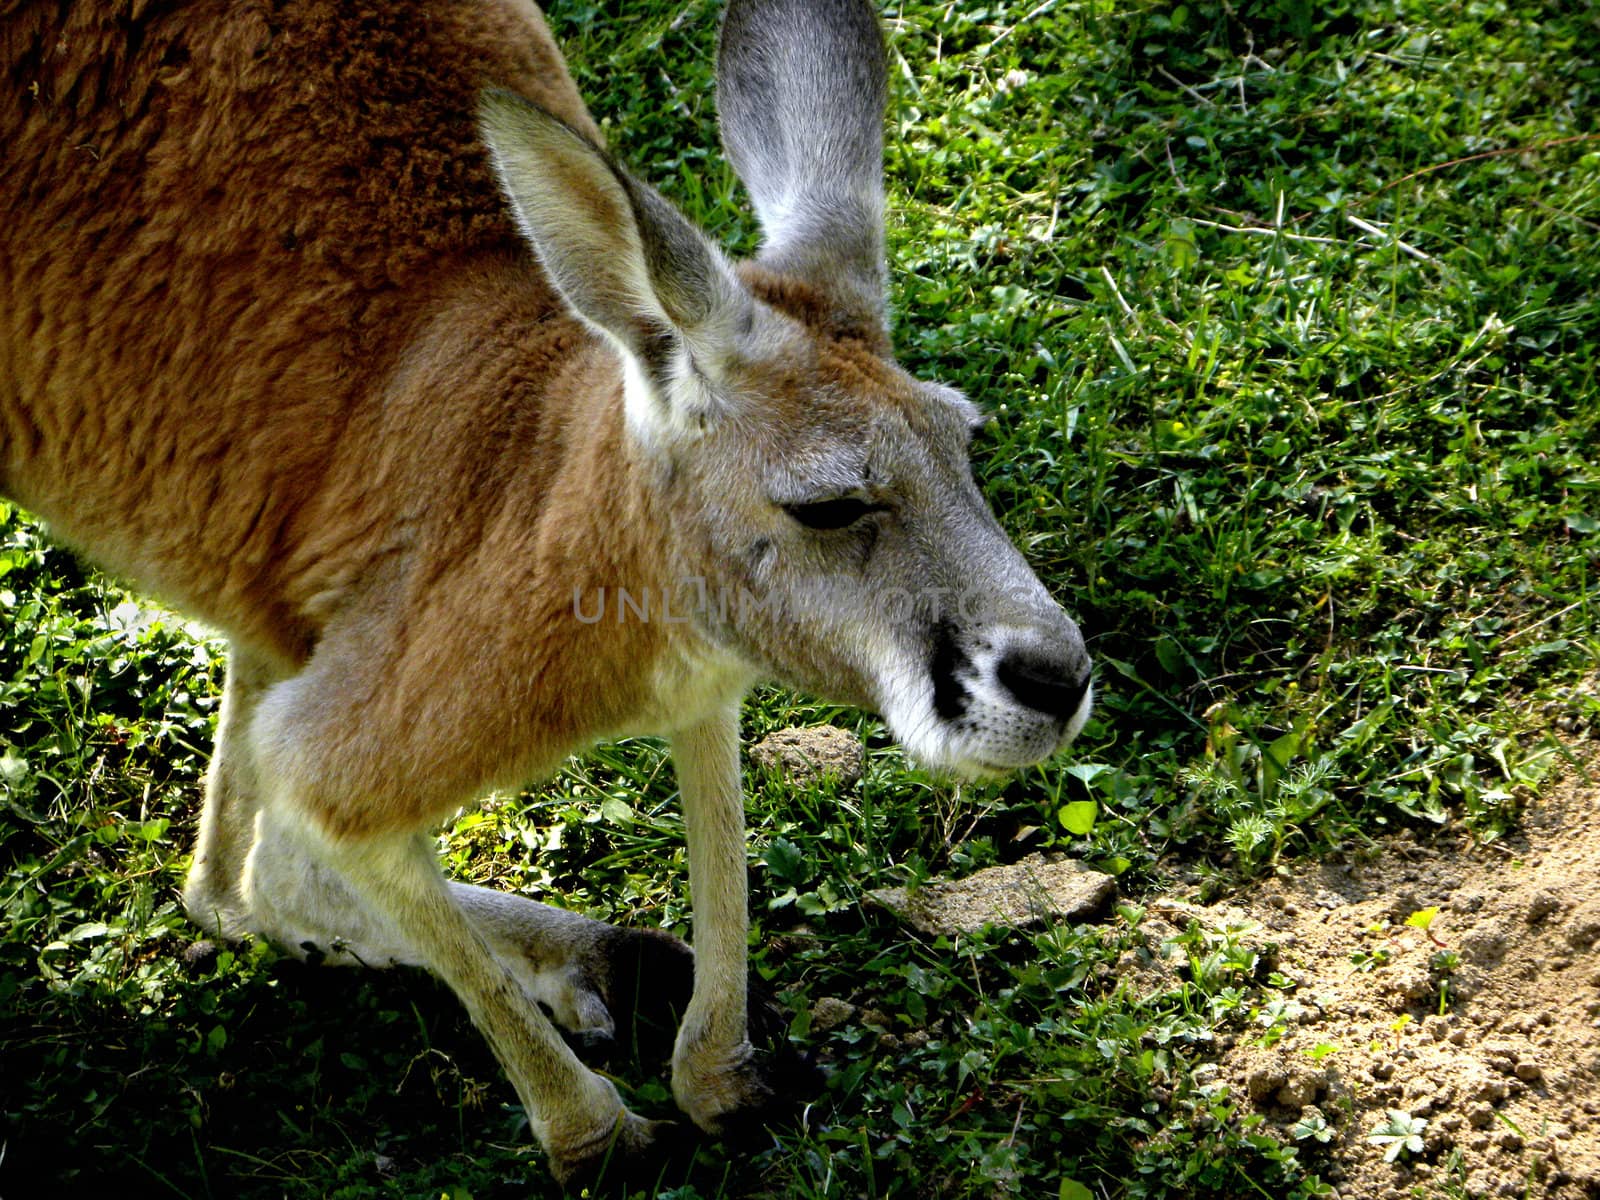 Part of brown kangaroo with grass in the background.